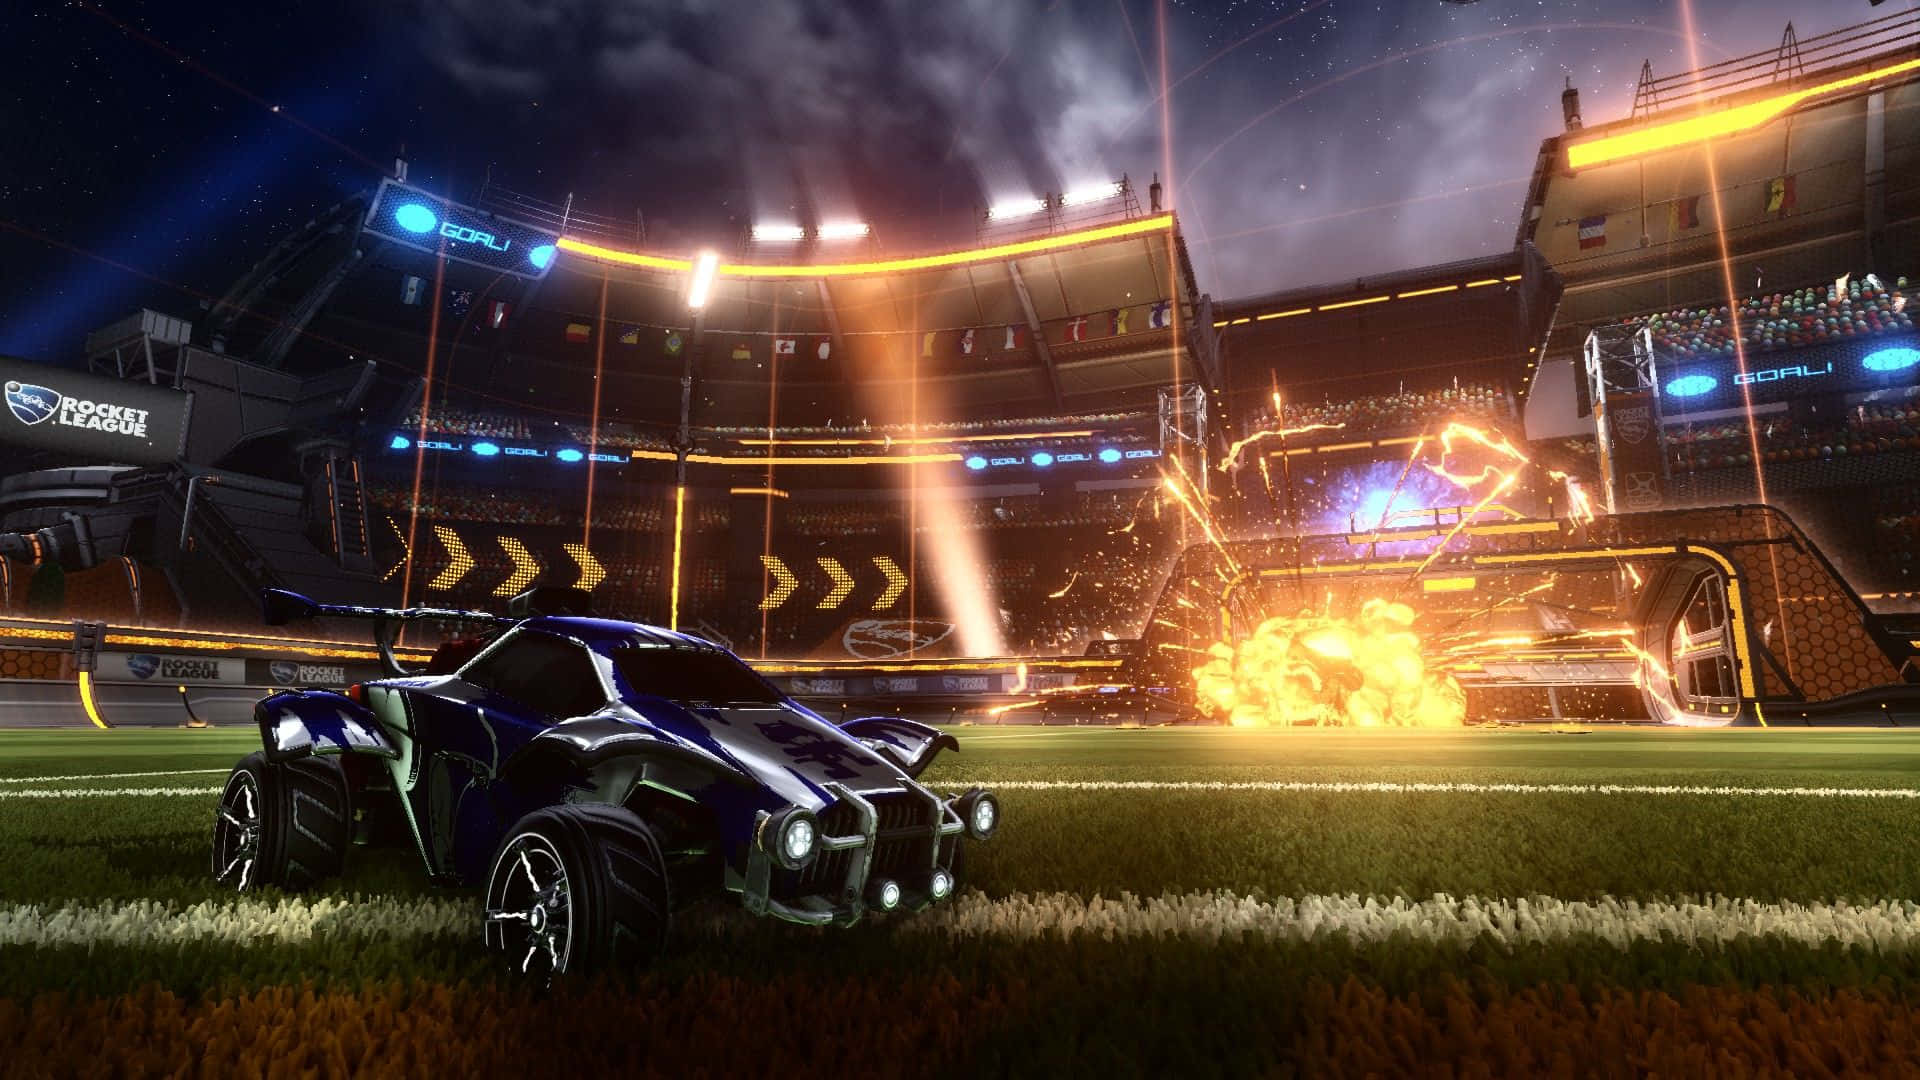 Battle it Out in the Best Rocket League Arena